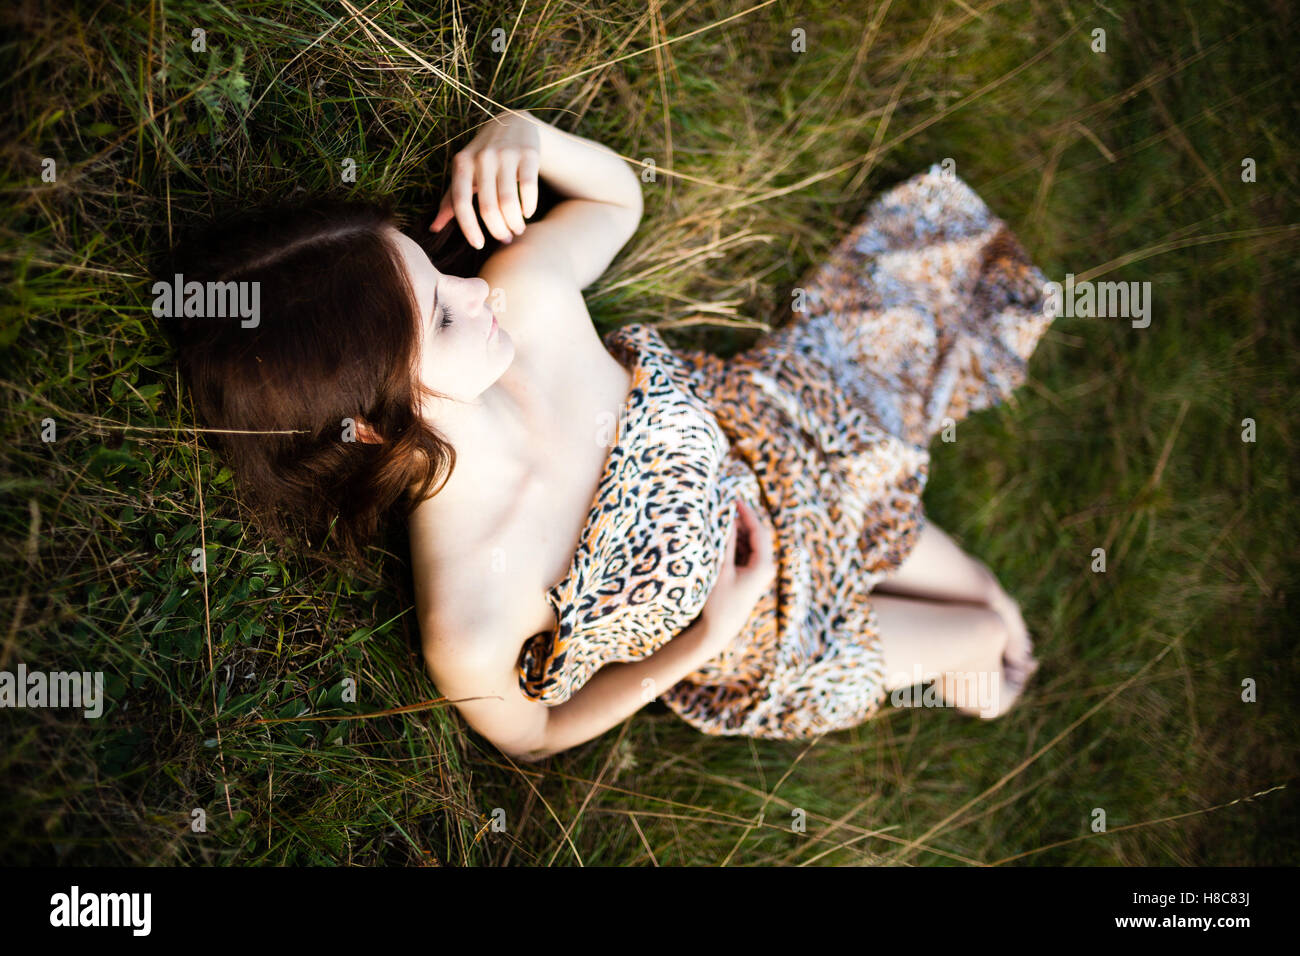 Caucasian long hair girl in spotty dress  lying on the ground. Stock Photo